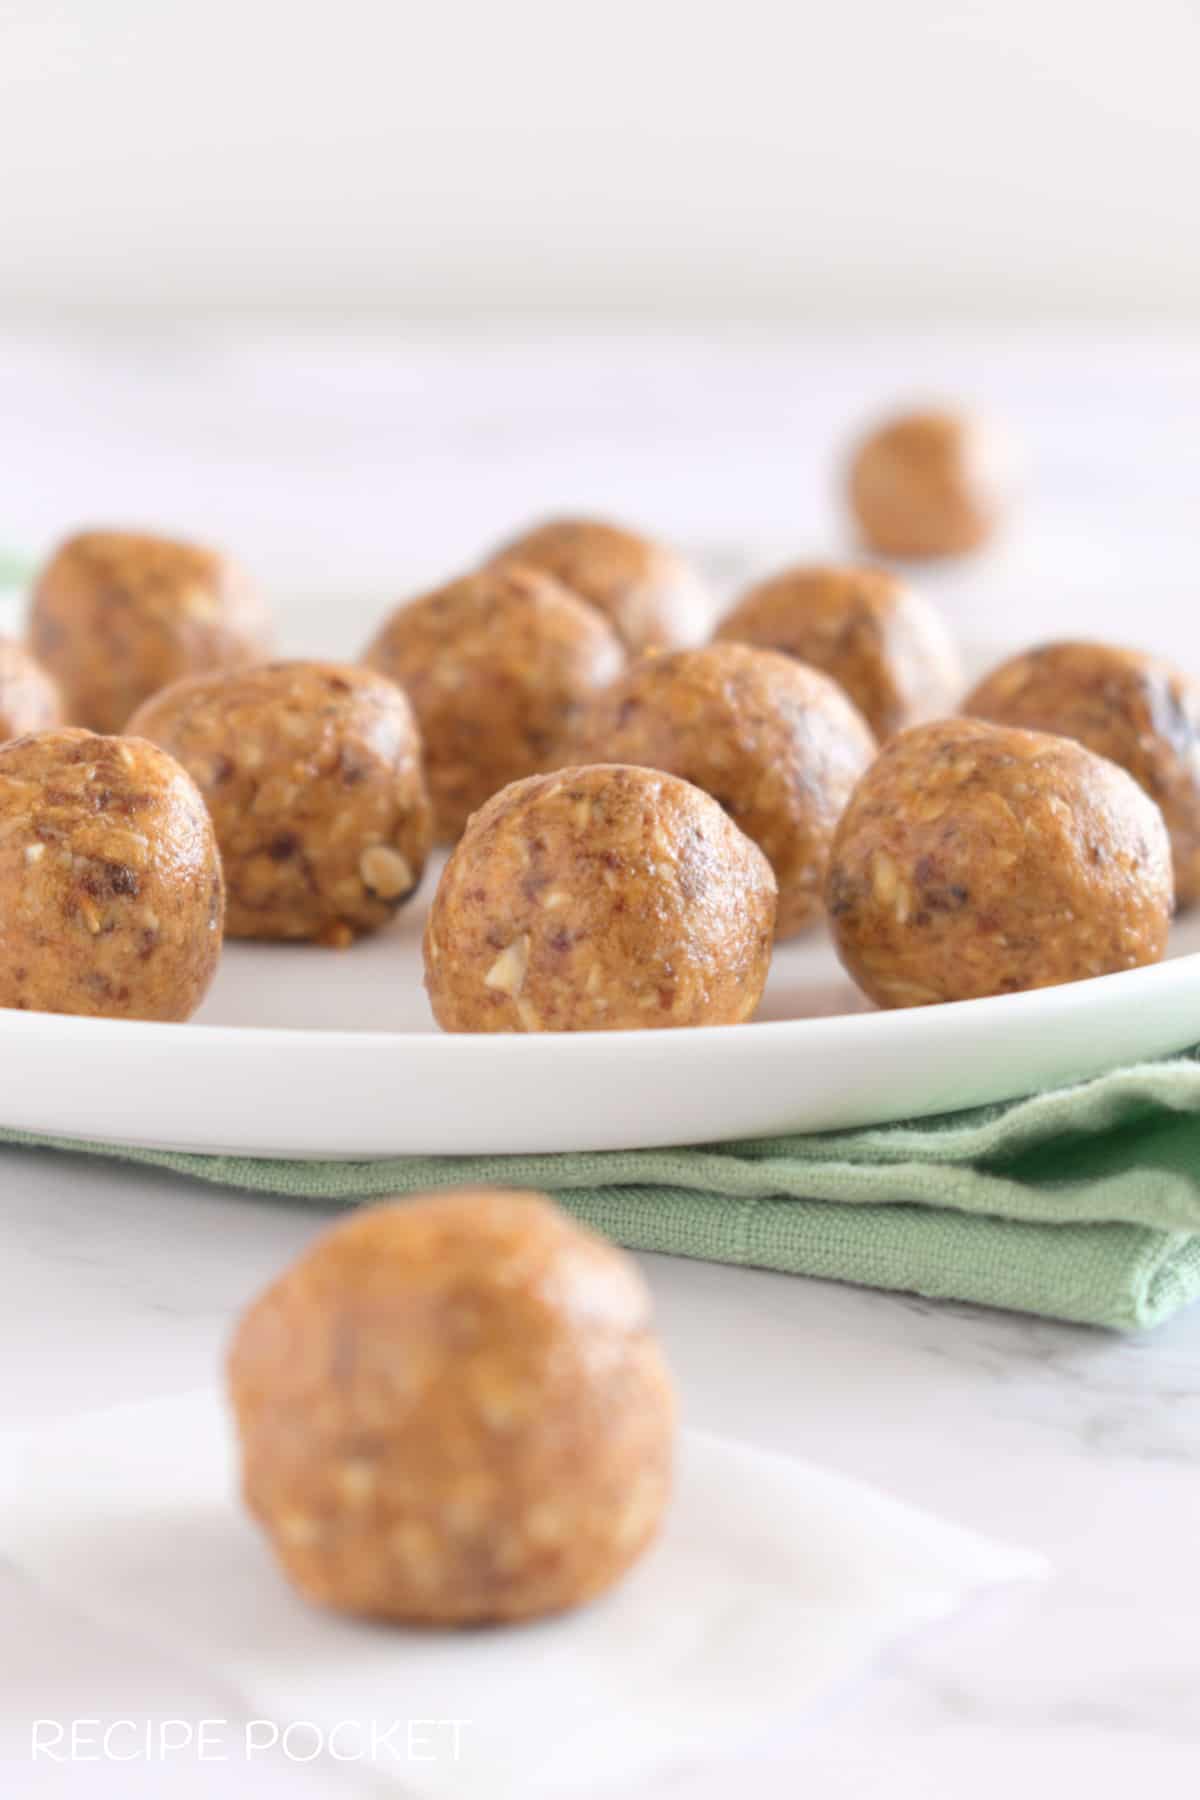 Peanut butter balls with oats on a plate.